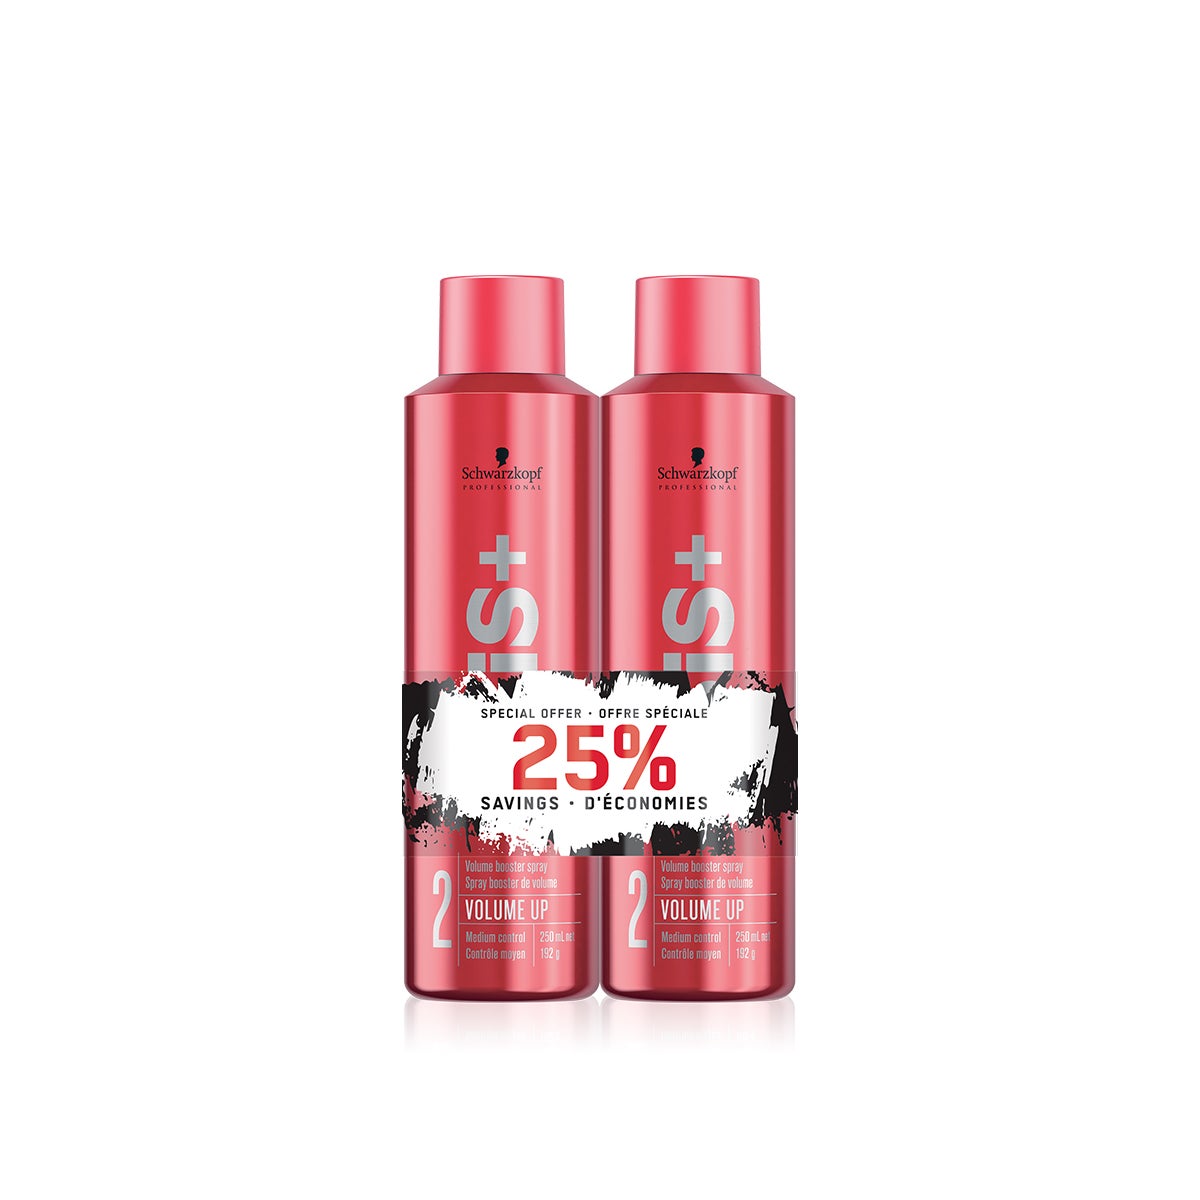 OSIS Volume Up Booster Spray Duo